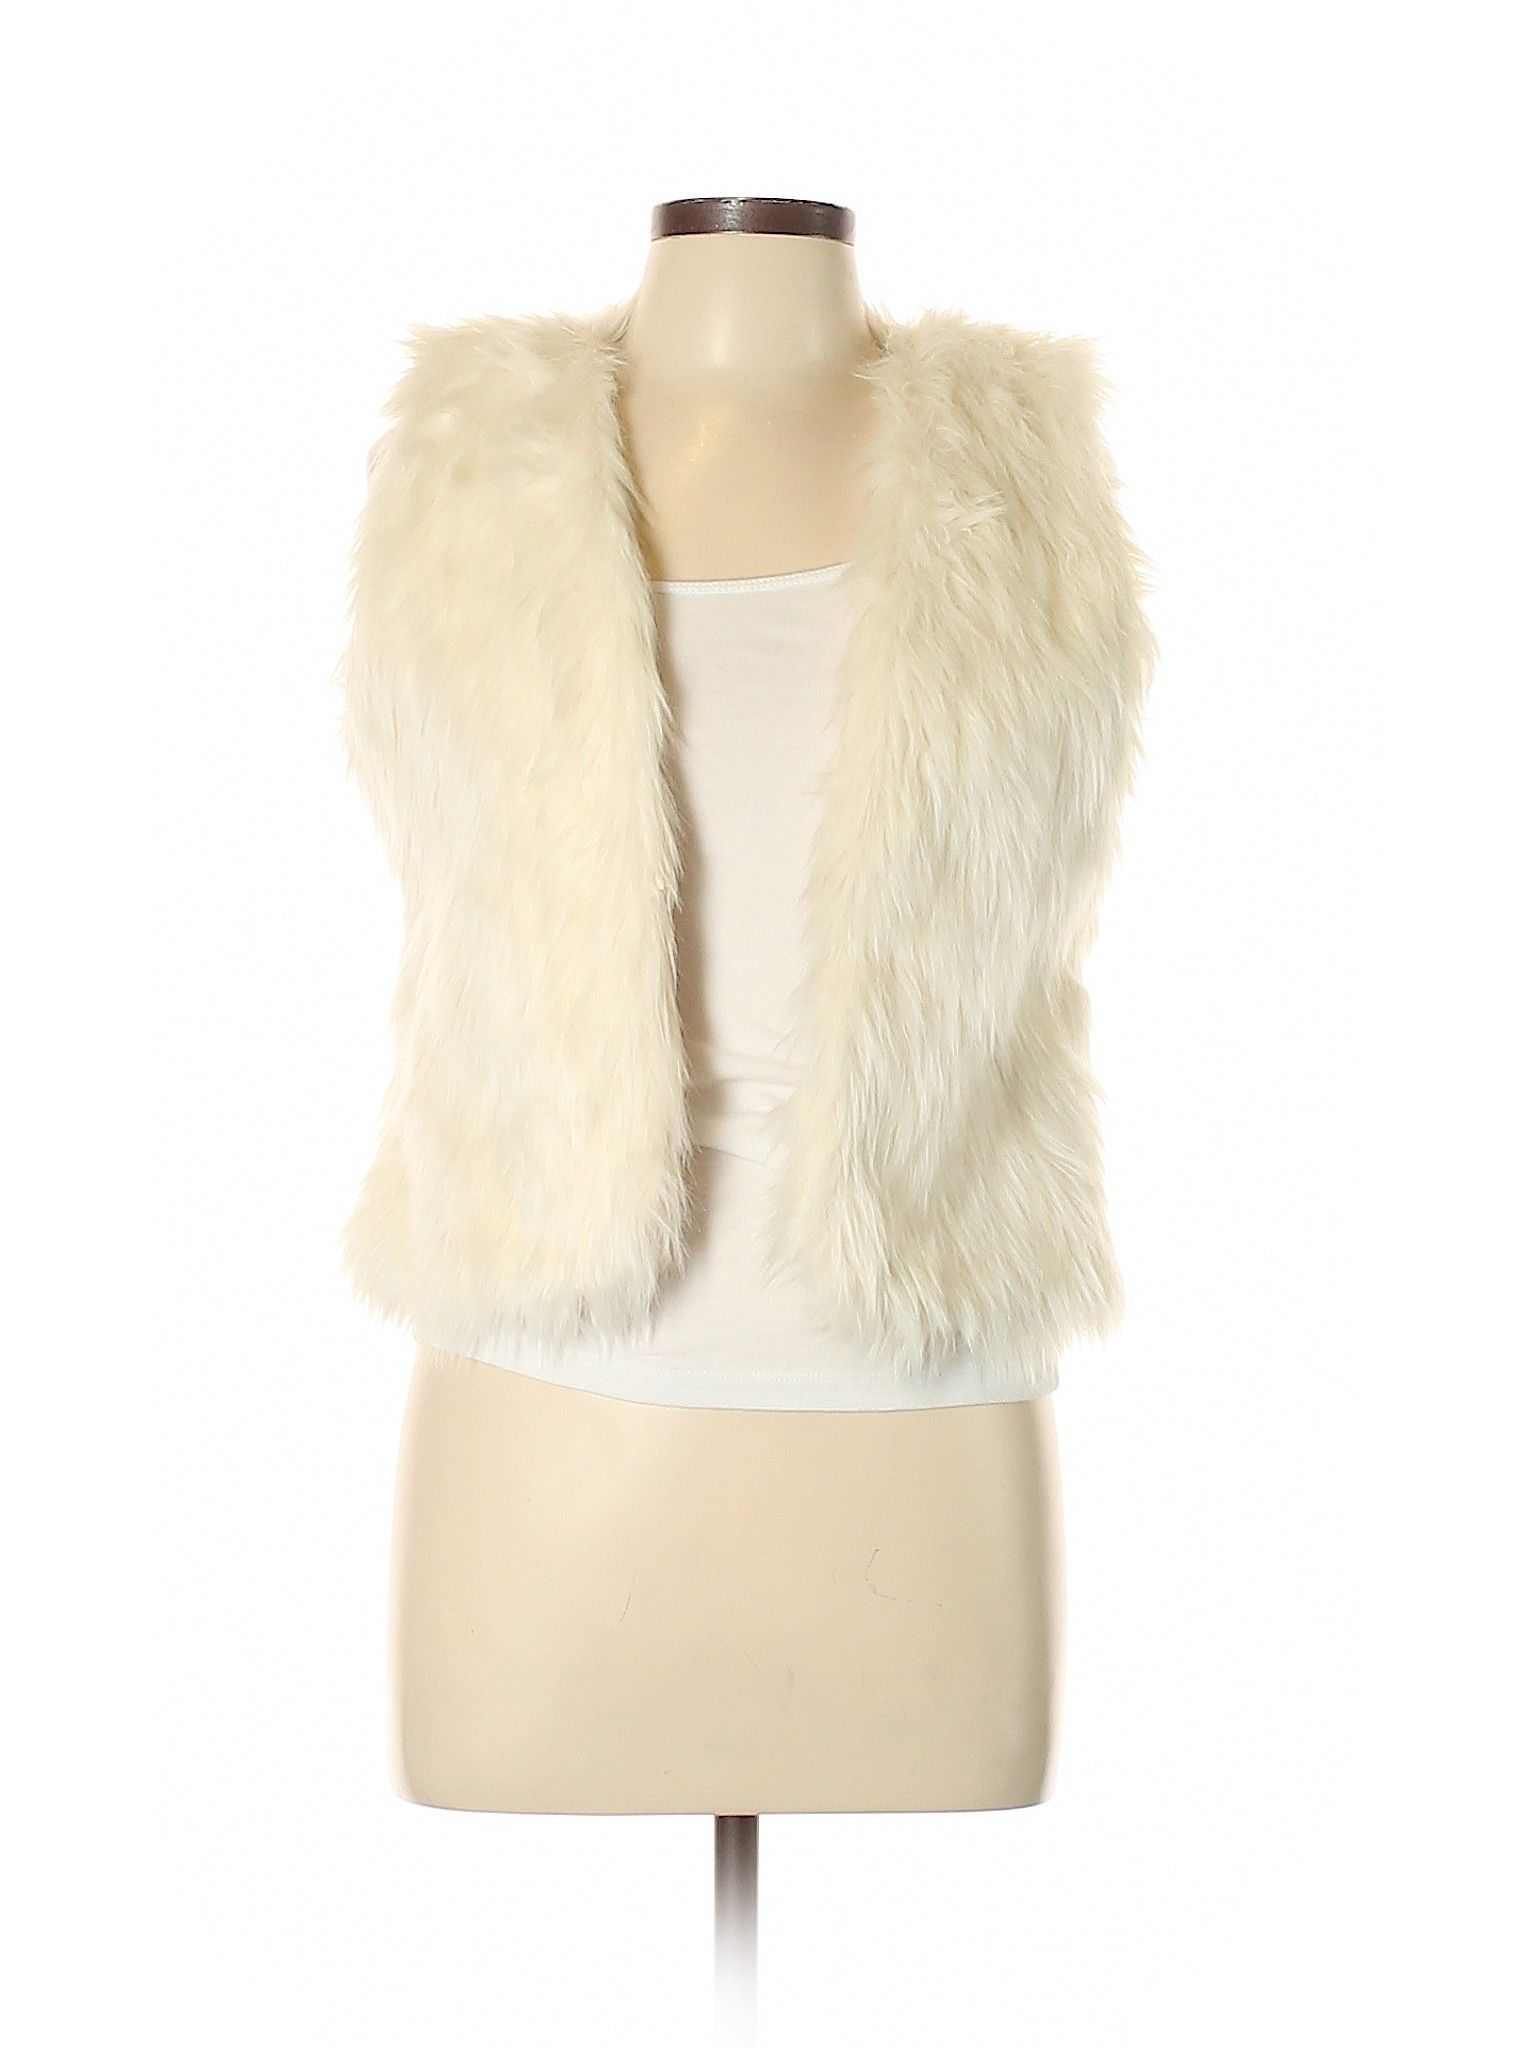 Mossimo Supply Co. Faux Fur Vest Size 11: Beige Junior Jackets & Outerwear - 44877593 | thredUP